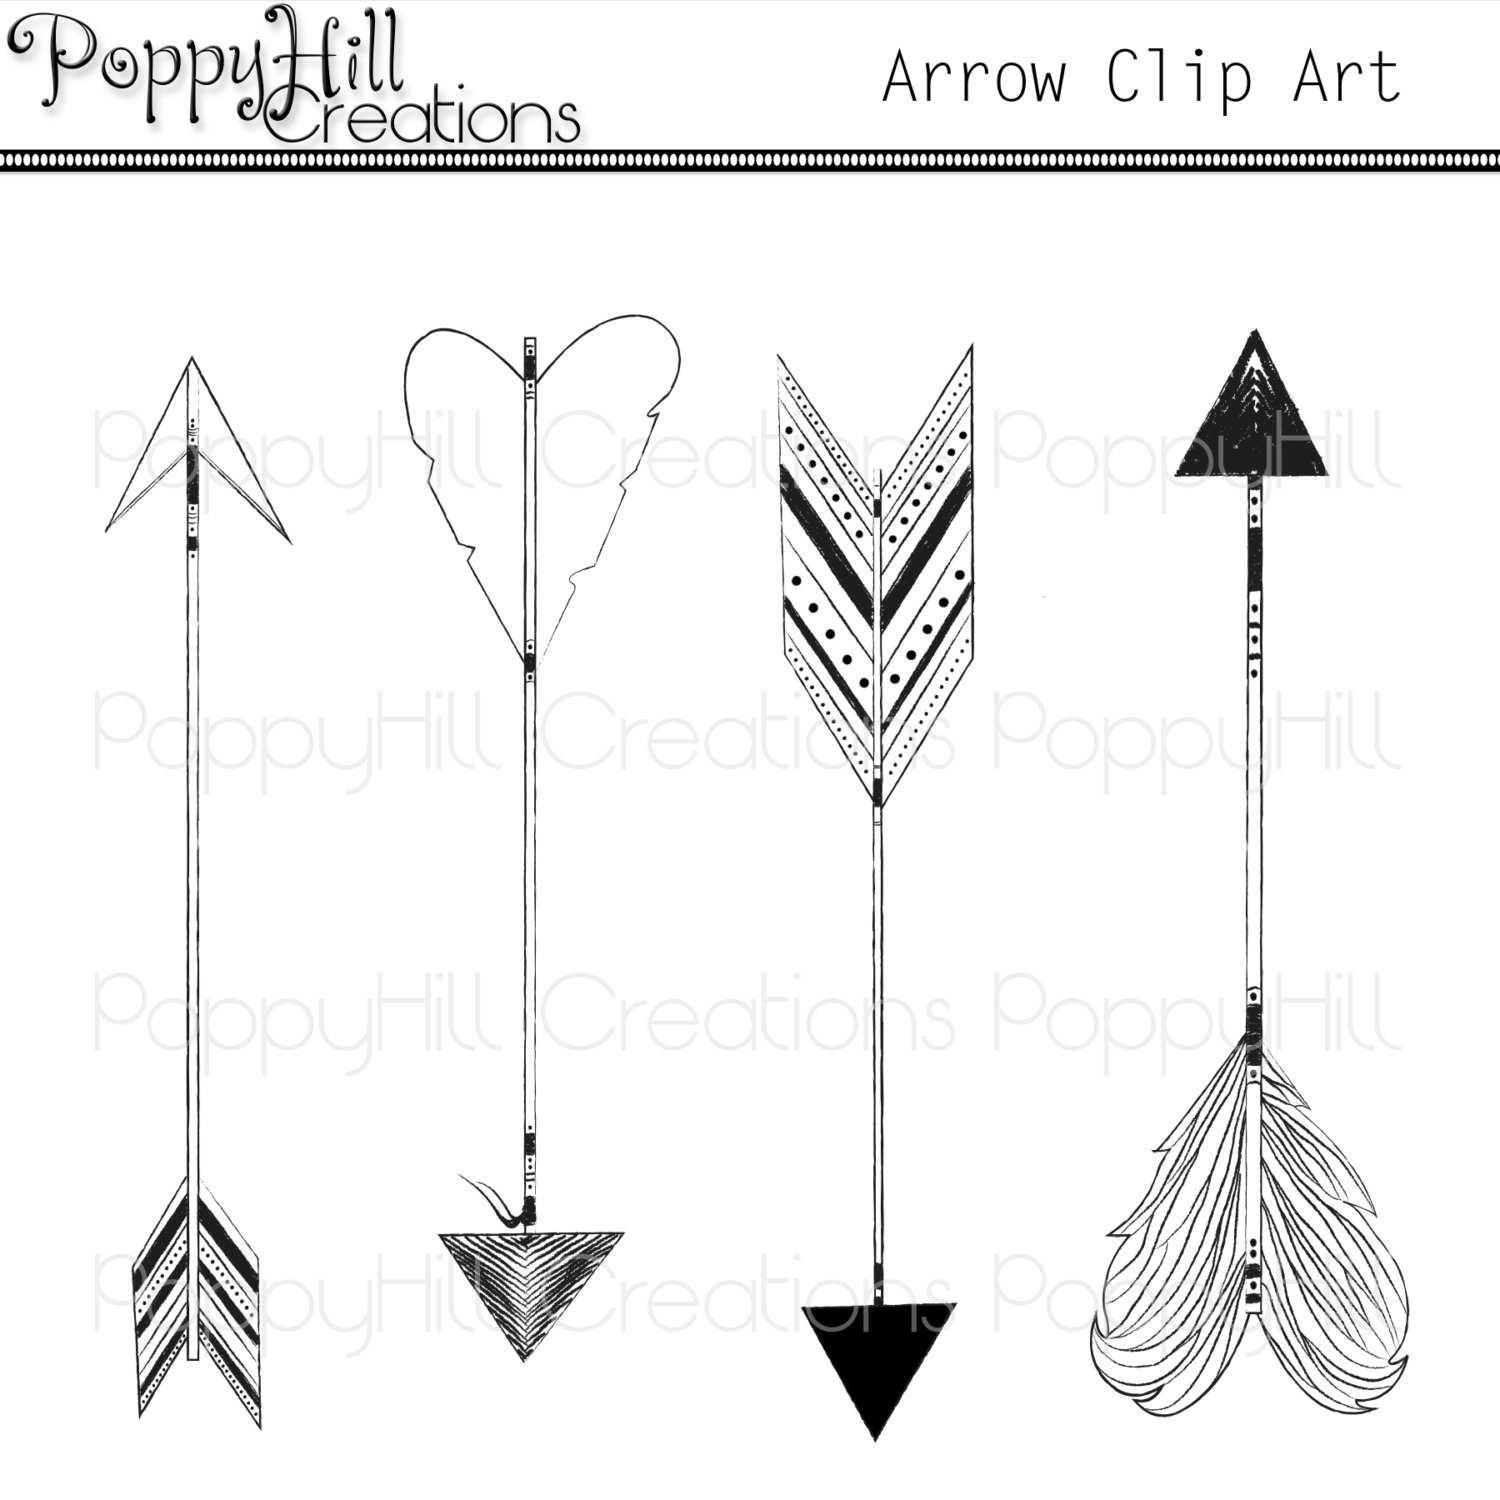 Free Indian Arrow Cliparts, Download Free Clip Art, Free.